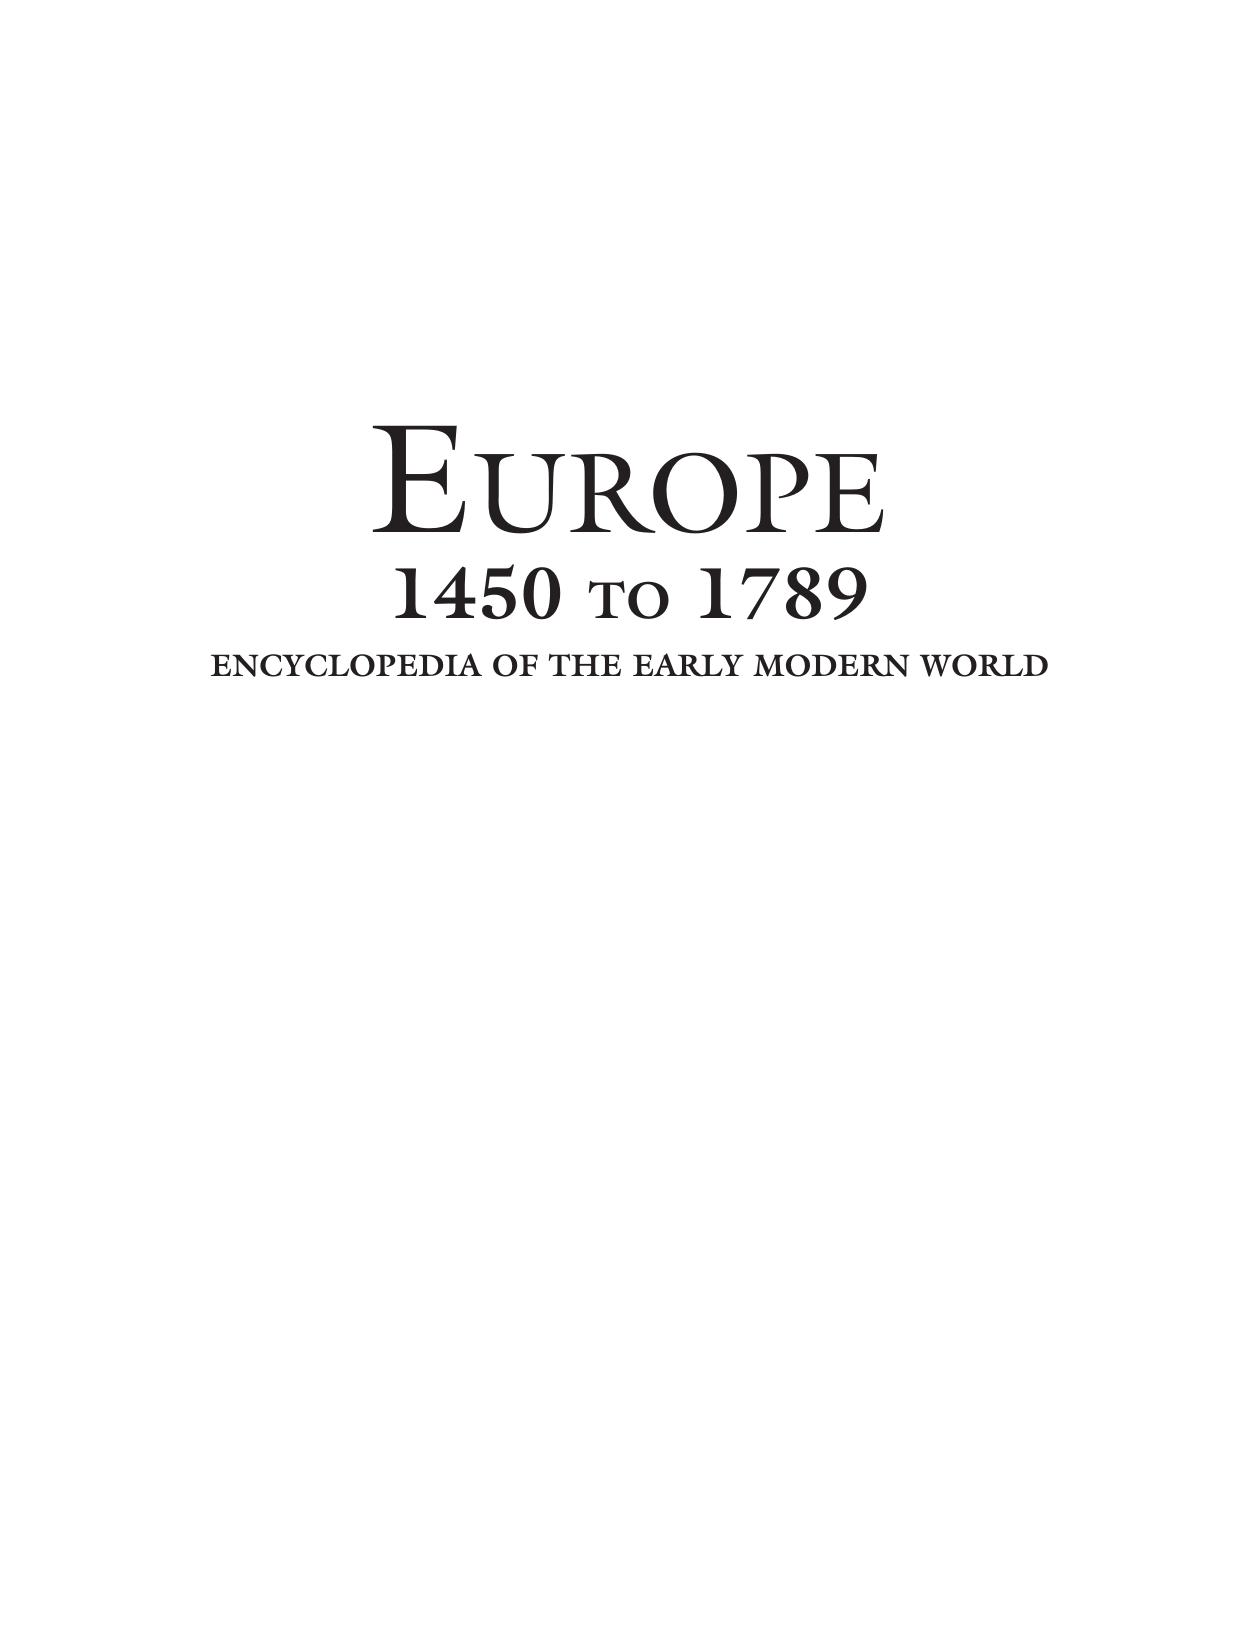 Europe 1450 to 1789 encyclopedia of the early modern world - Volume 5